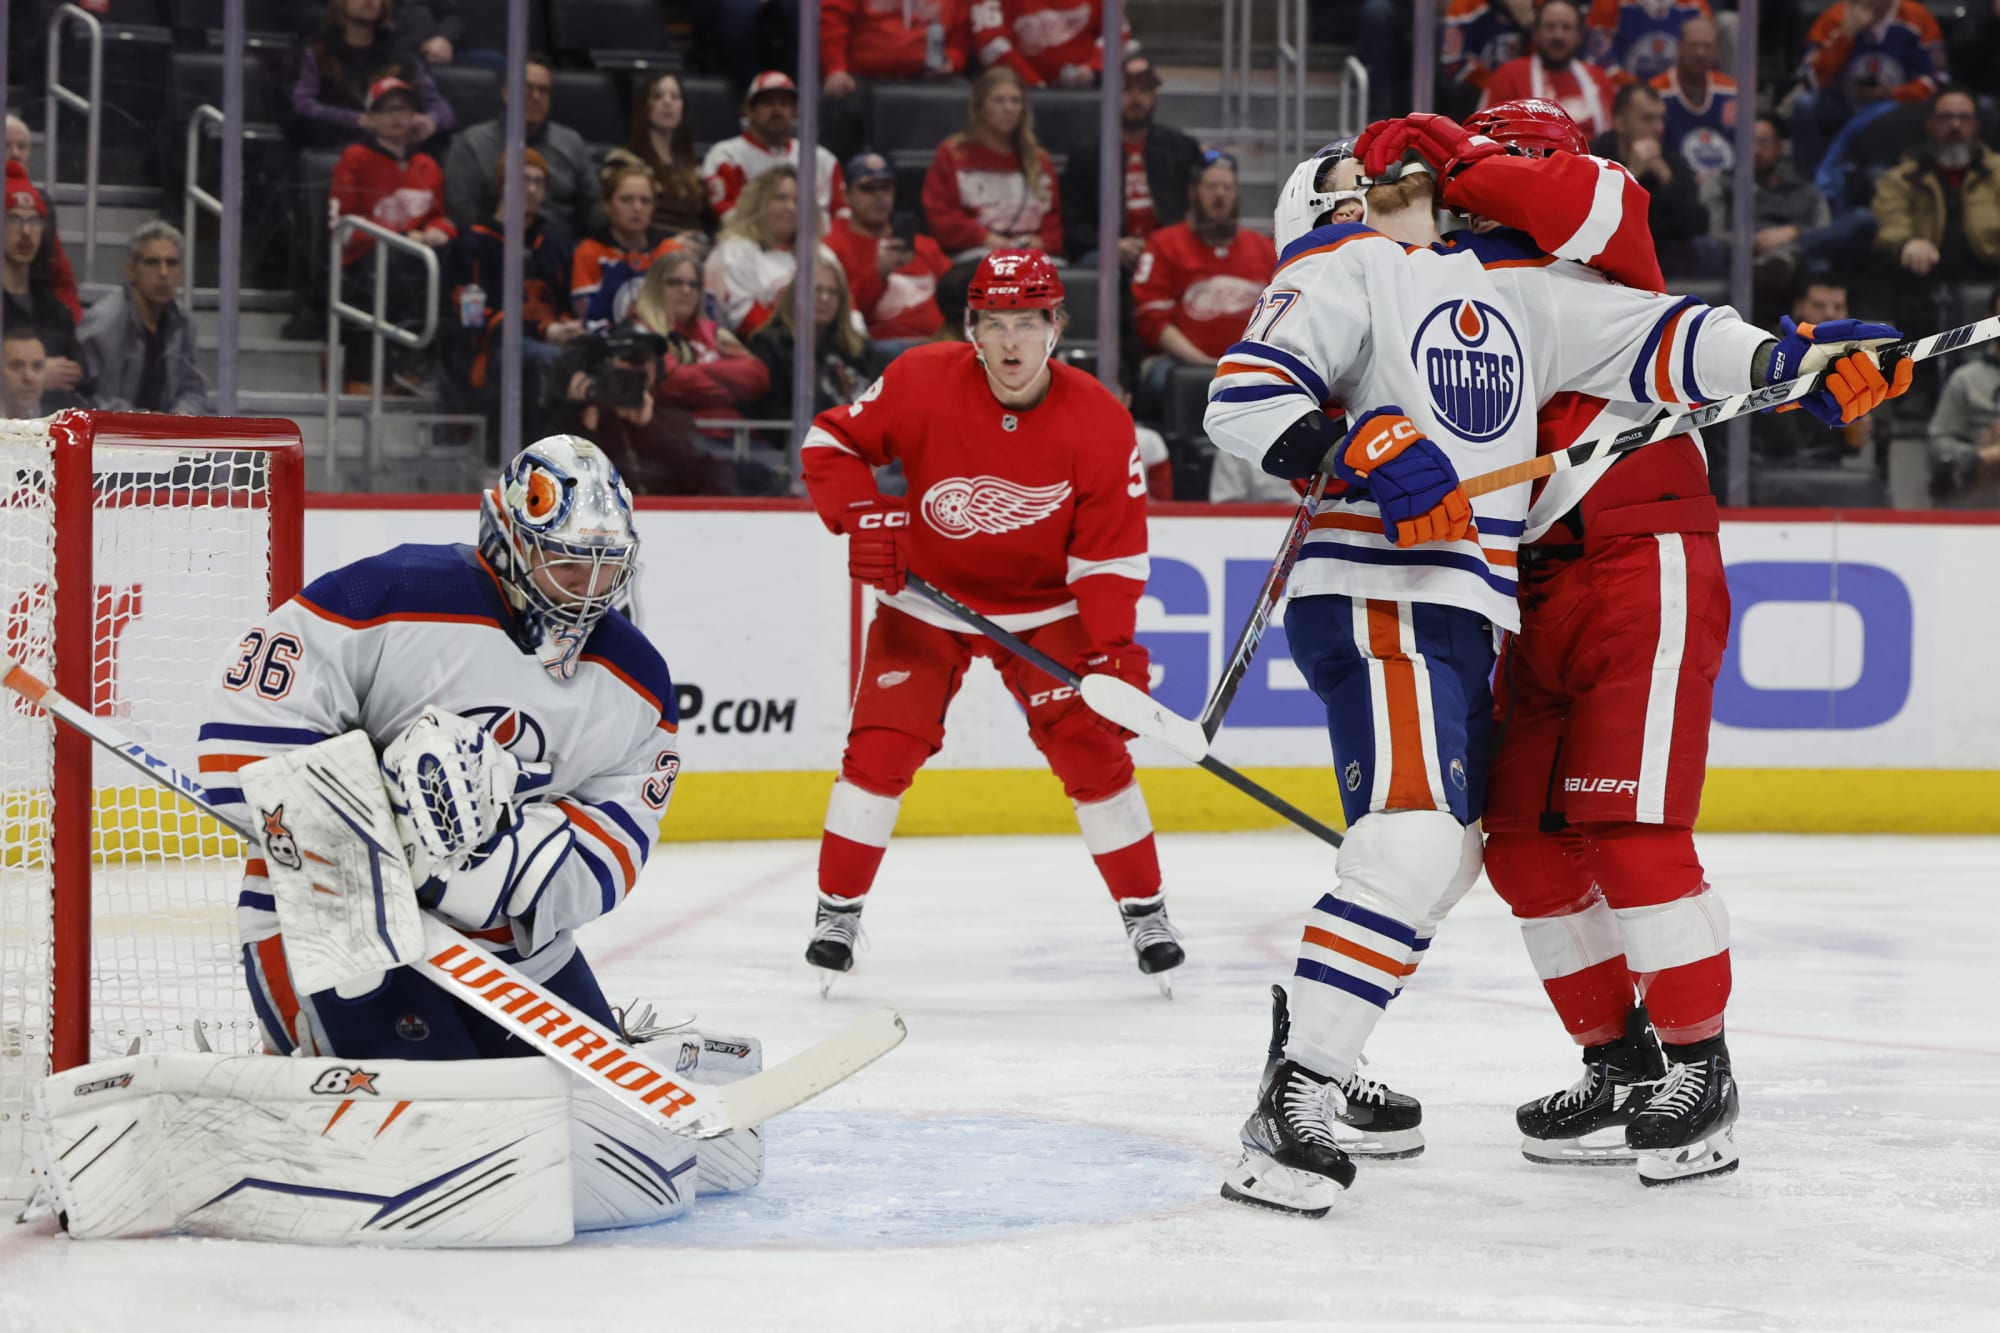 The Detroit Red Wings fall 5-2 to the Oilers in a physical contest ...